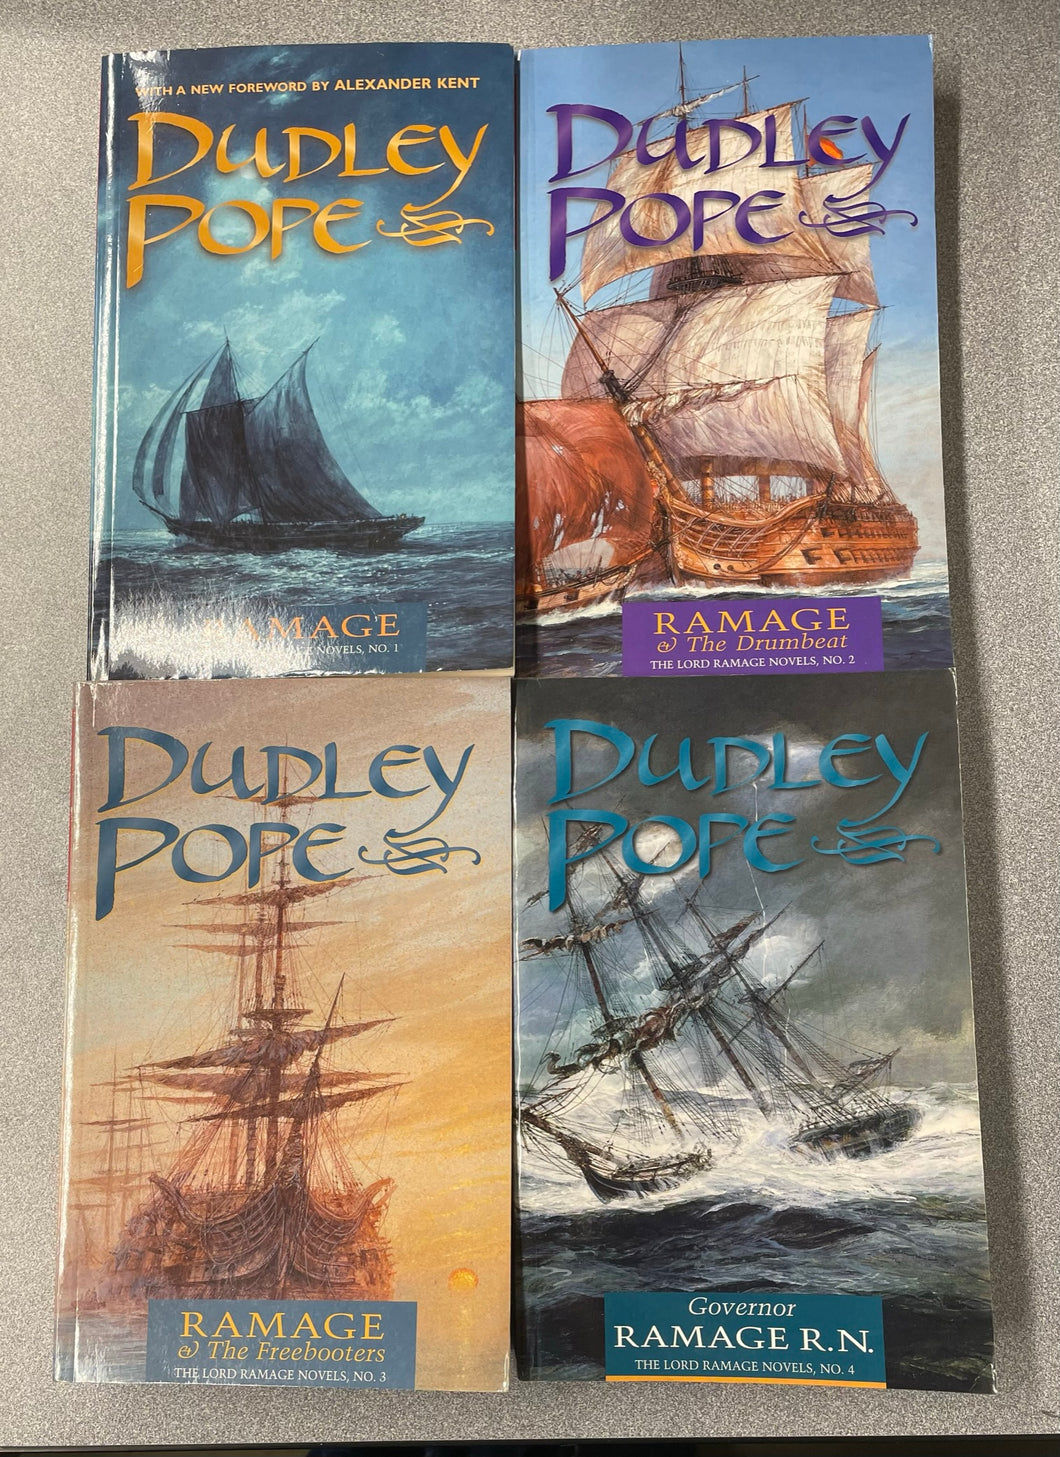 Pope, Dudley, The Ramage Touch: The Lord Ramage Novels, No. 10 [2001] AF 3/23